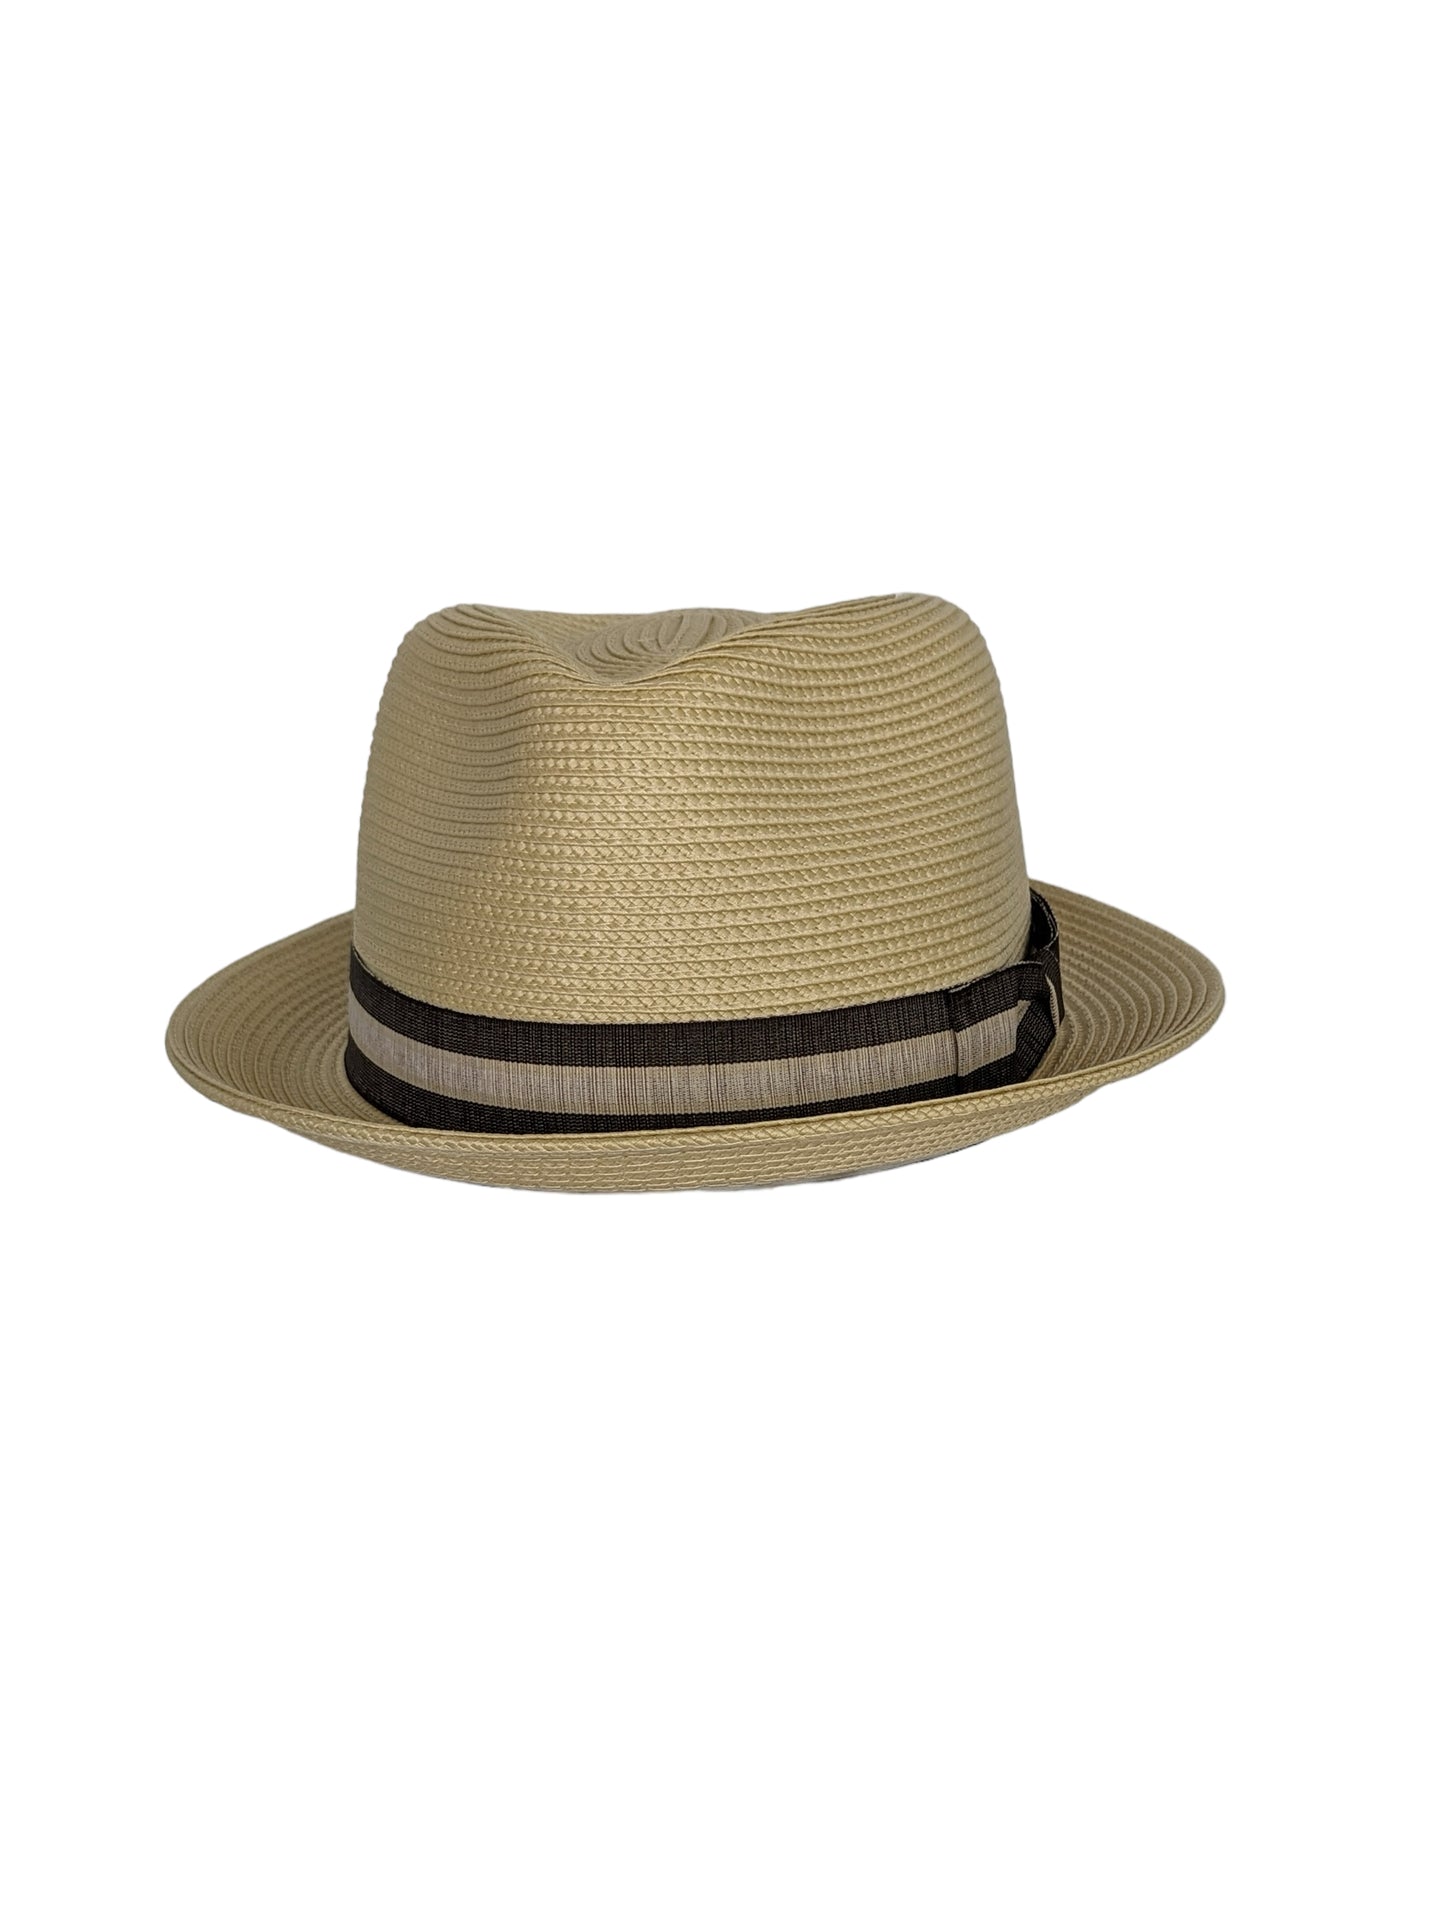 The Carver - Wheat - Men's Poly Braid Hat